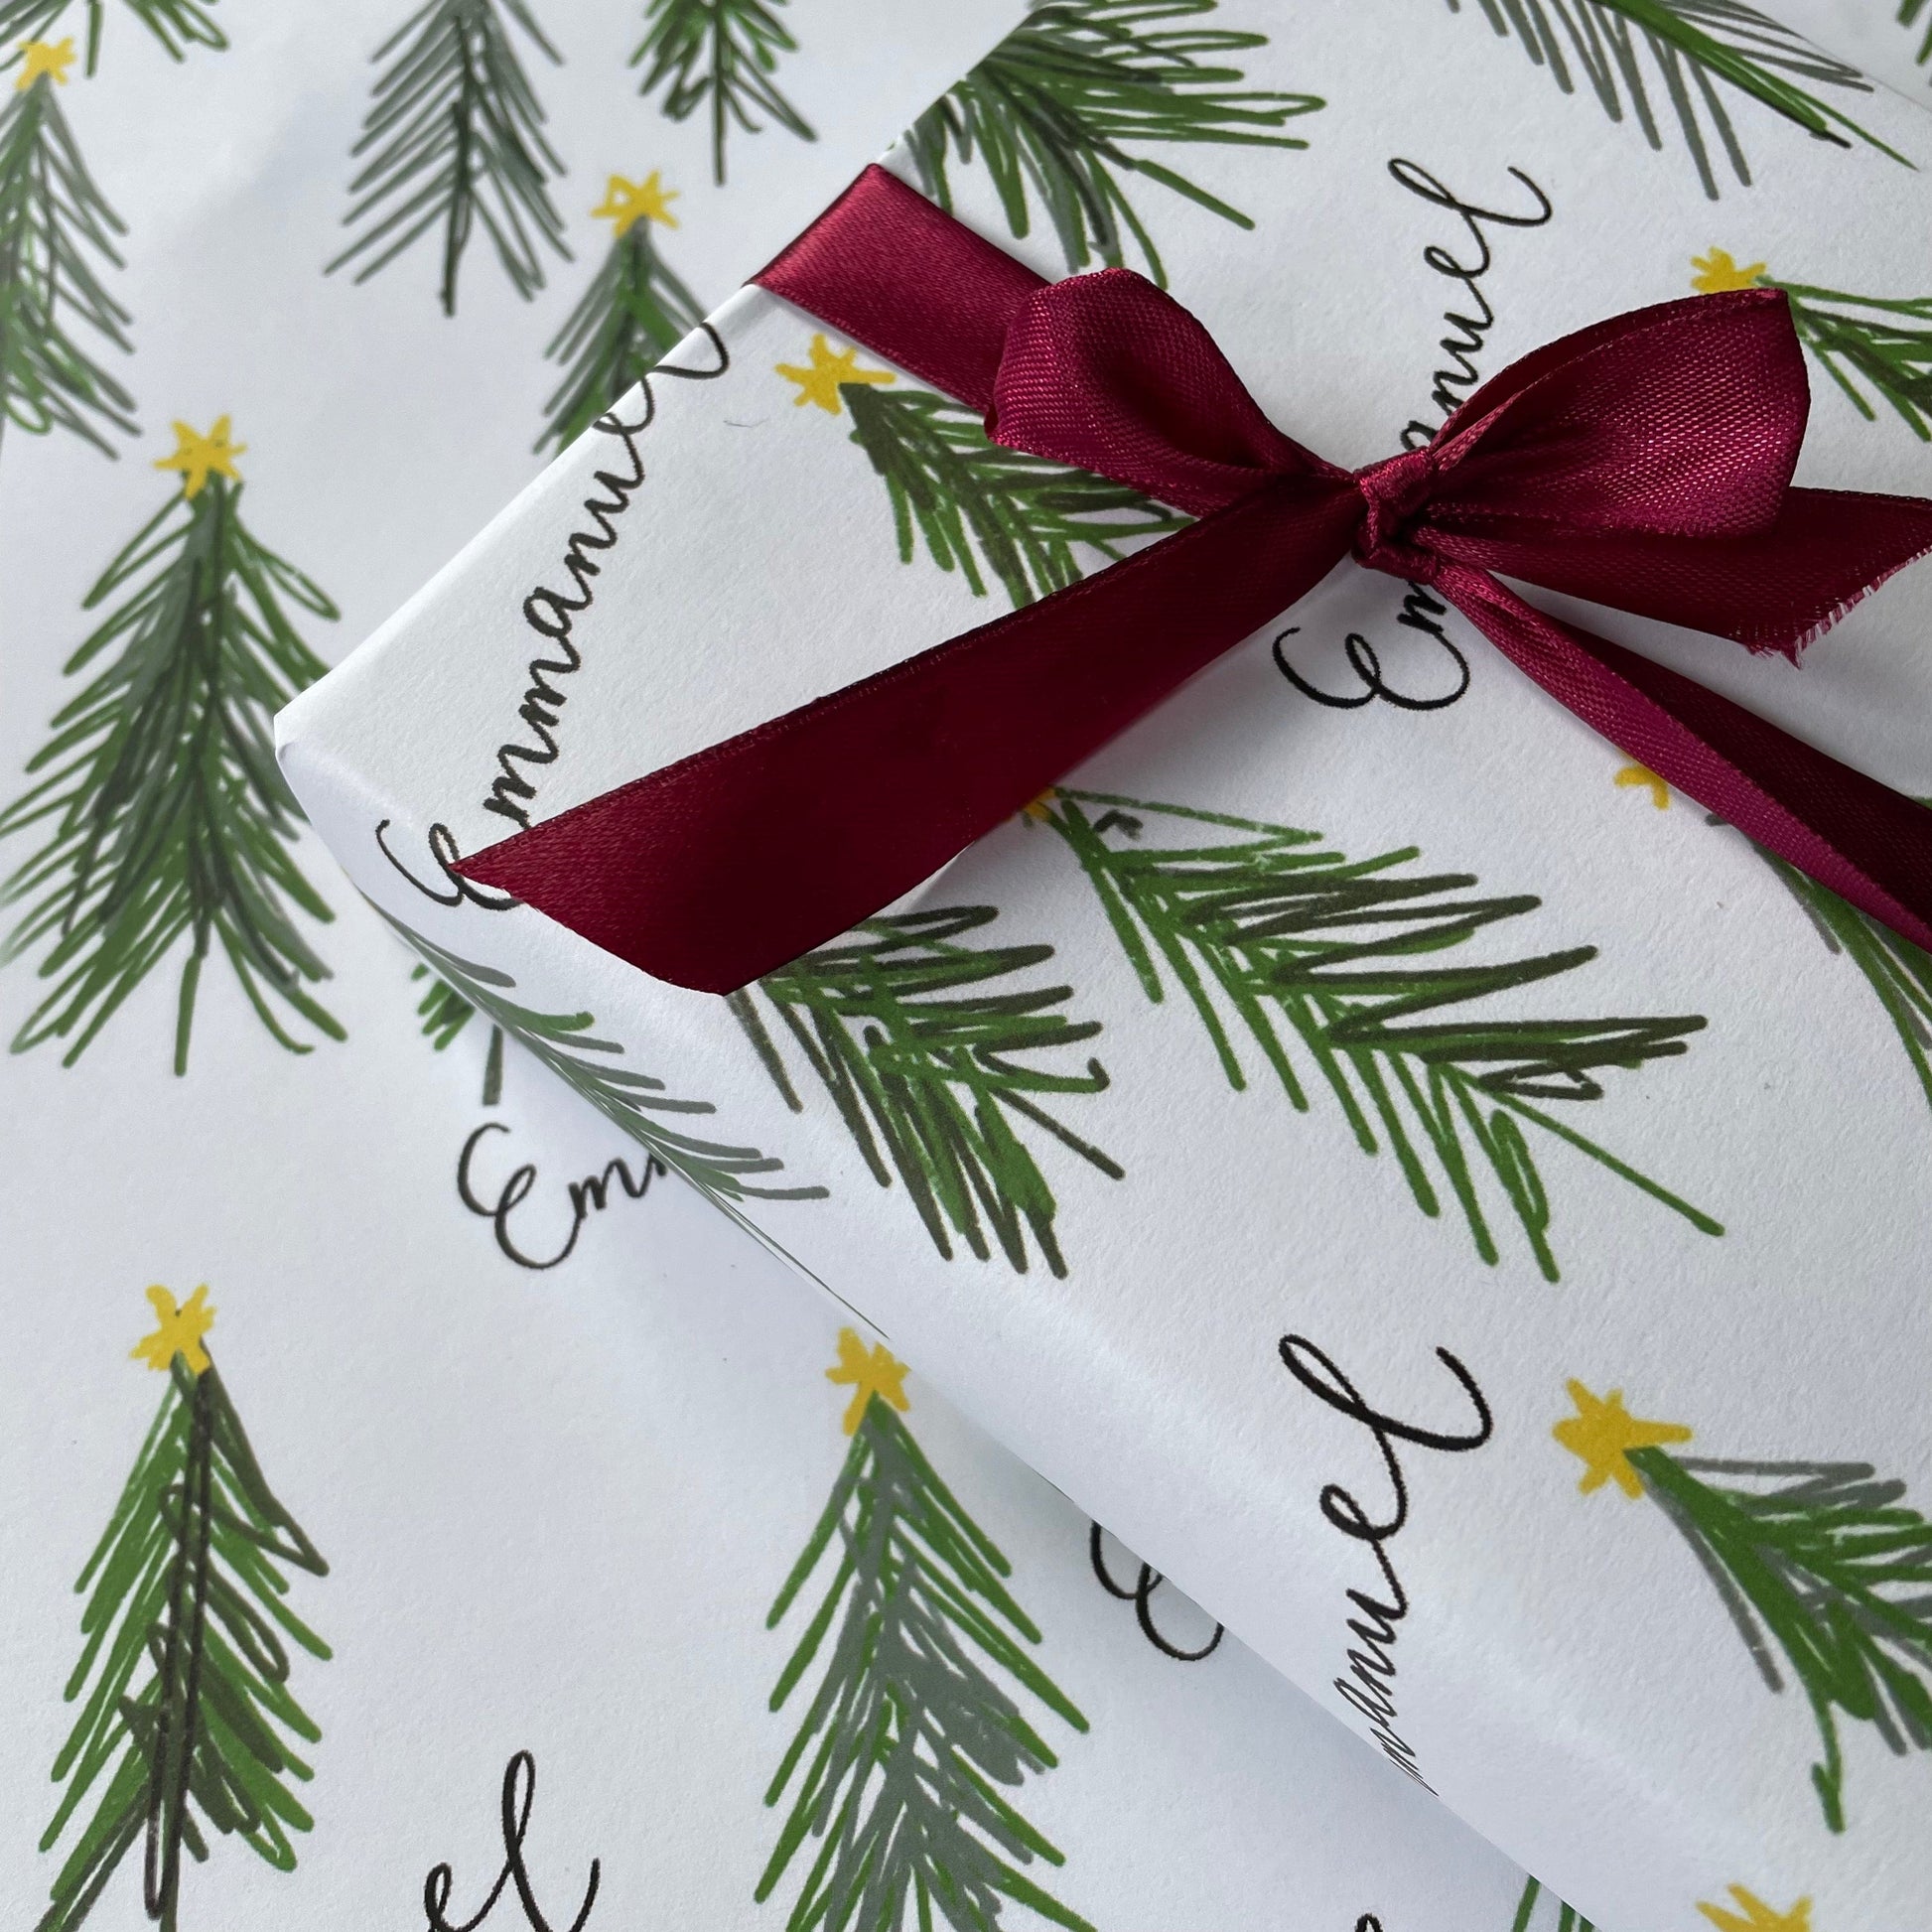 And Hope Designs Wrapping Paper “Emmanuel” Christmas tree wrapping paper